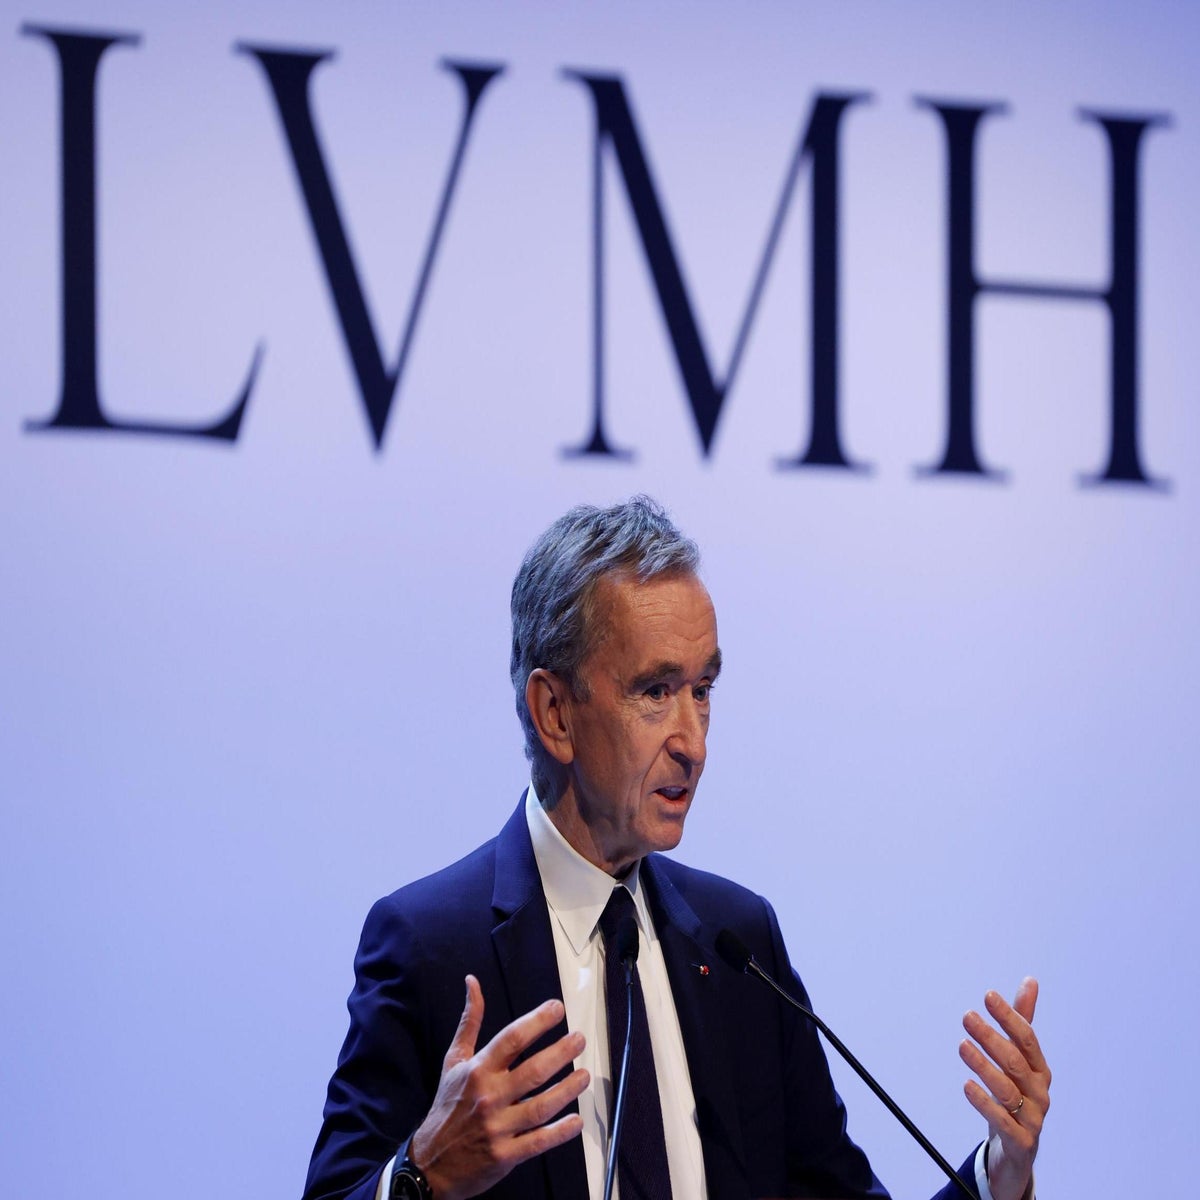 LVMH Is Making Hand Sanitizer In Perfume & Cosmetic FactoriesfFitness  Health